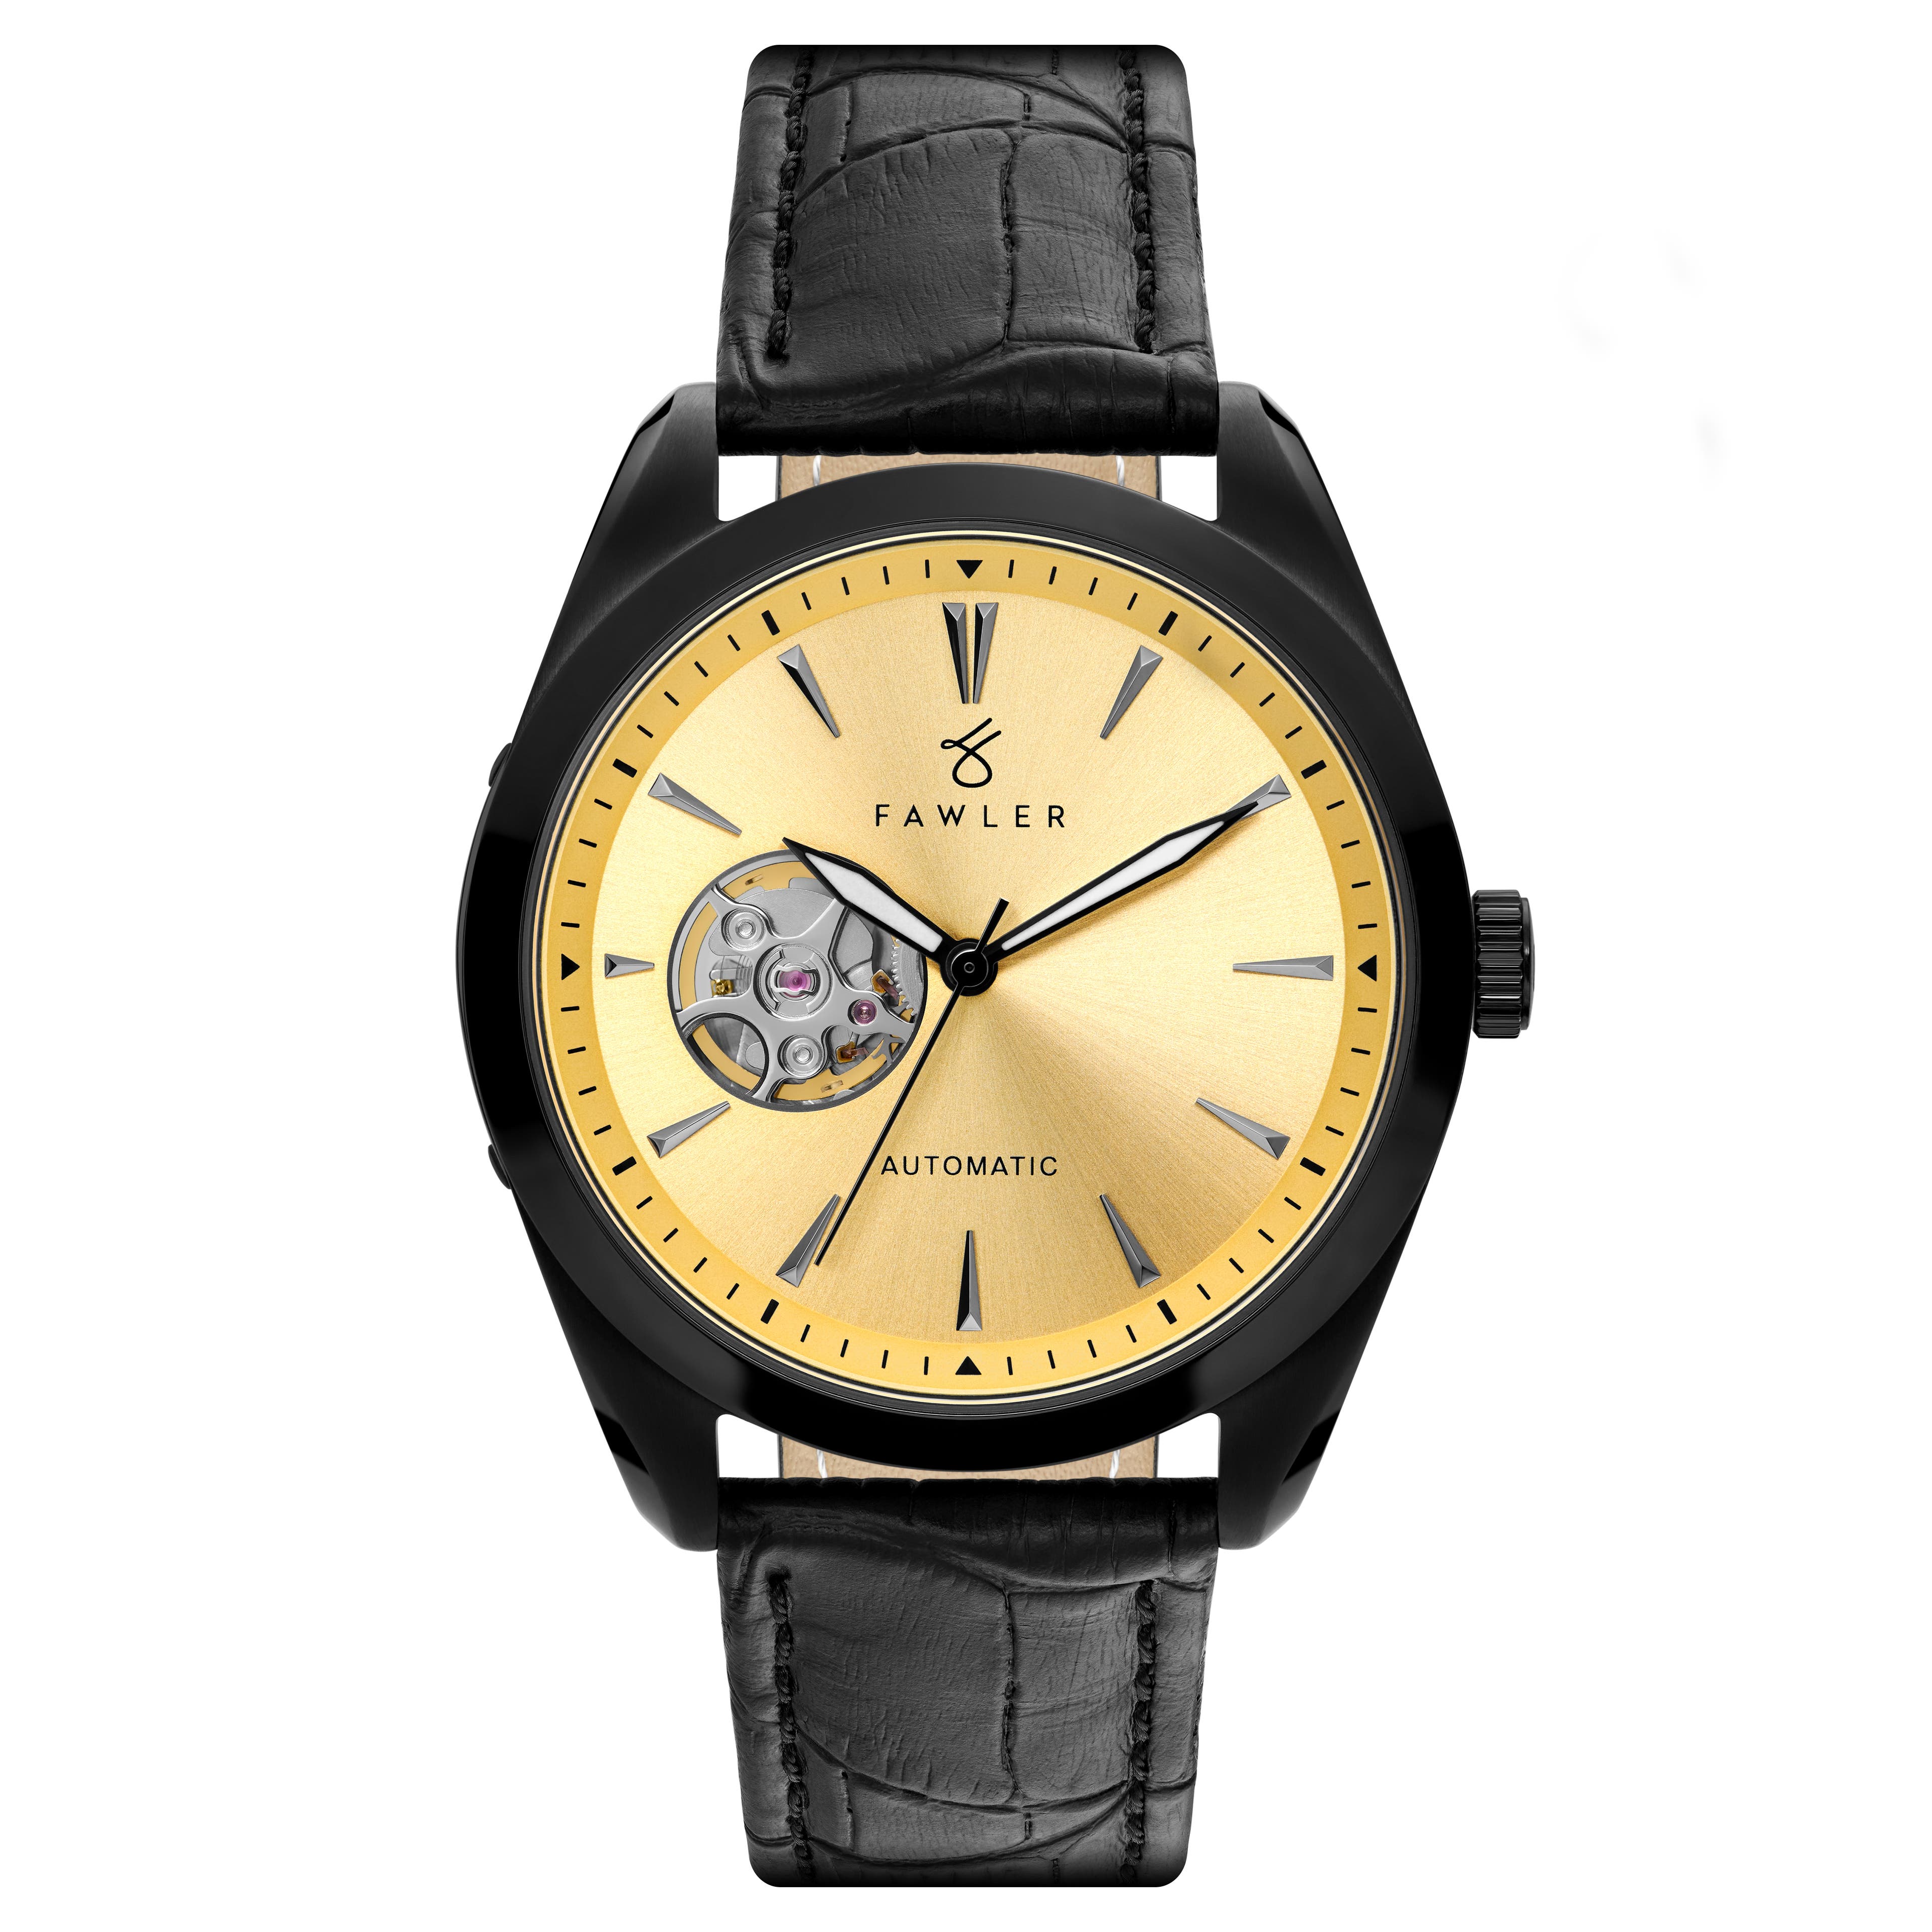 Fenes | Black Open-heart Skeleton Watch With Gold-Tone Dial & Black Leather Strap